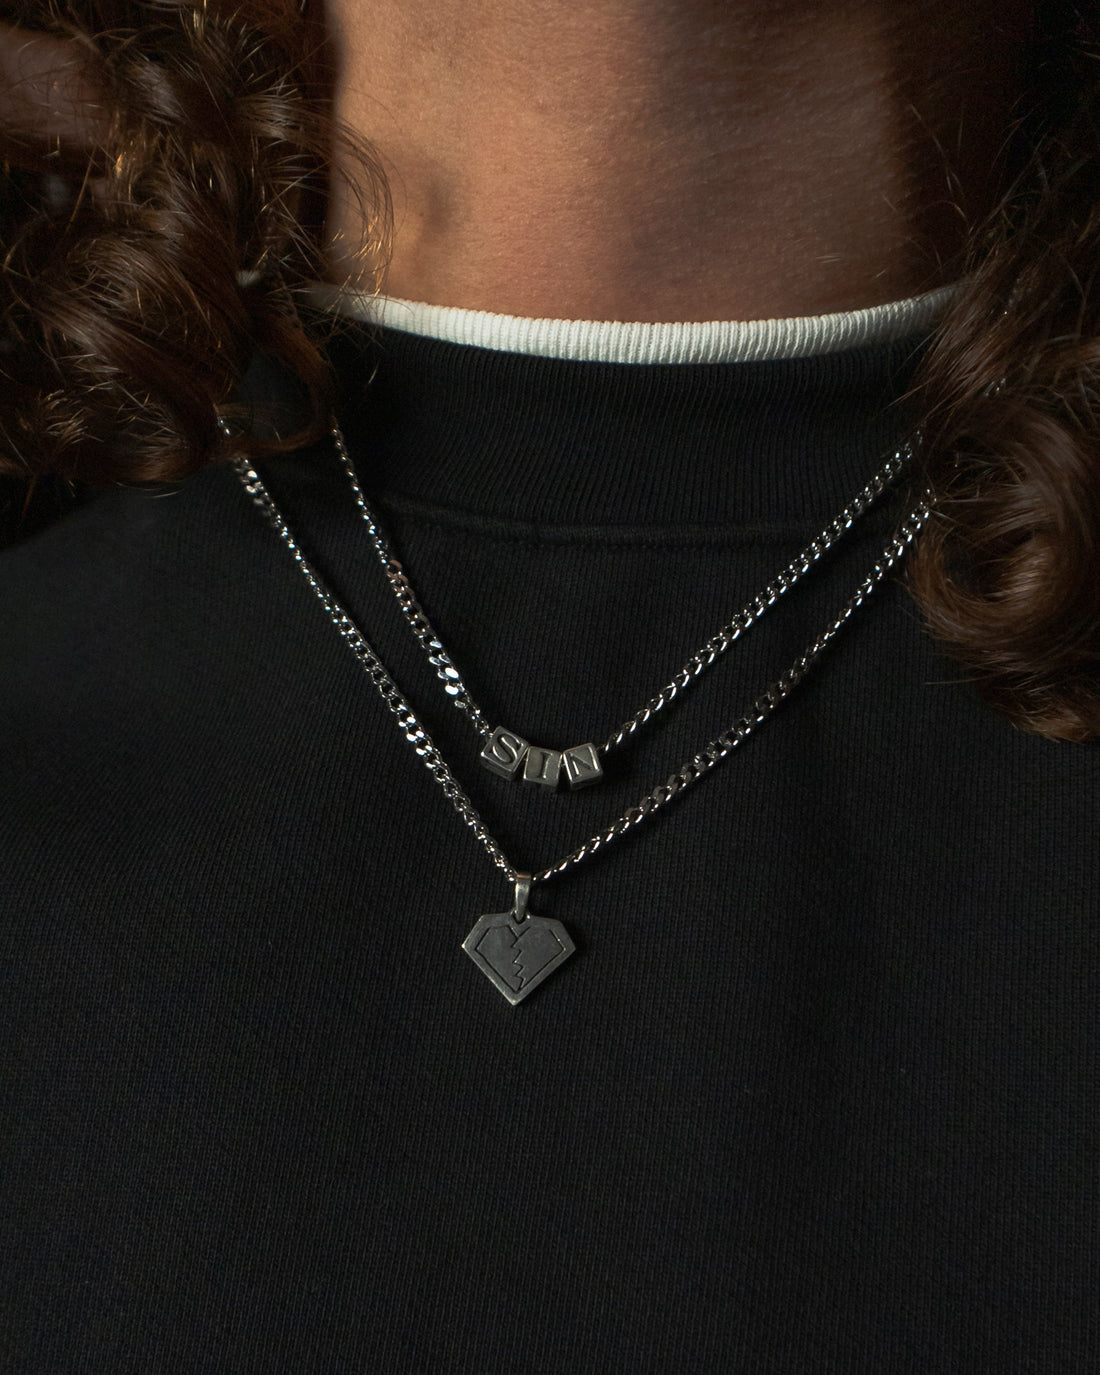 SINNERS BLOCK CHARM NECKLACE